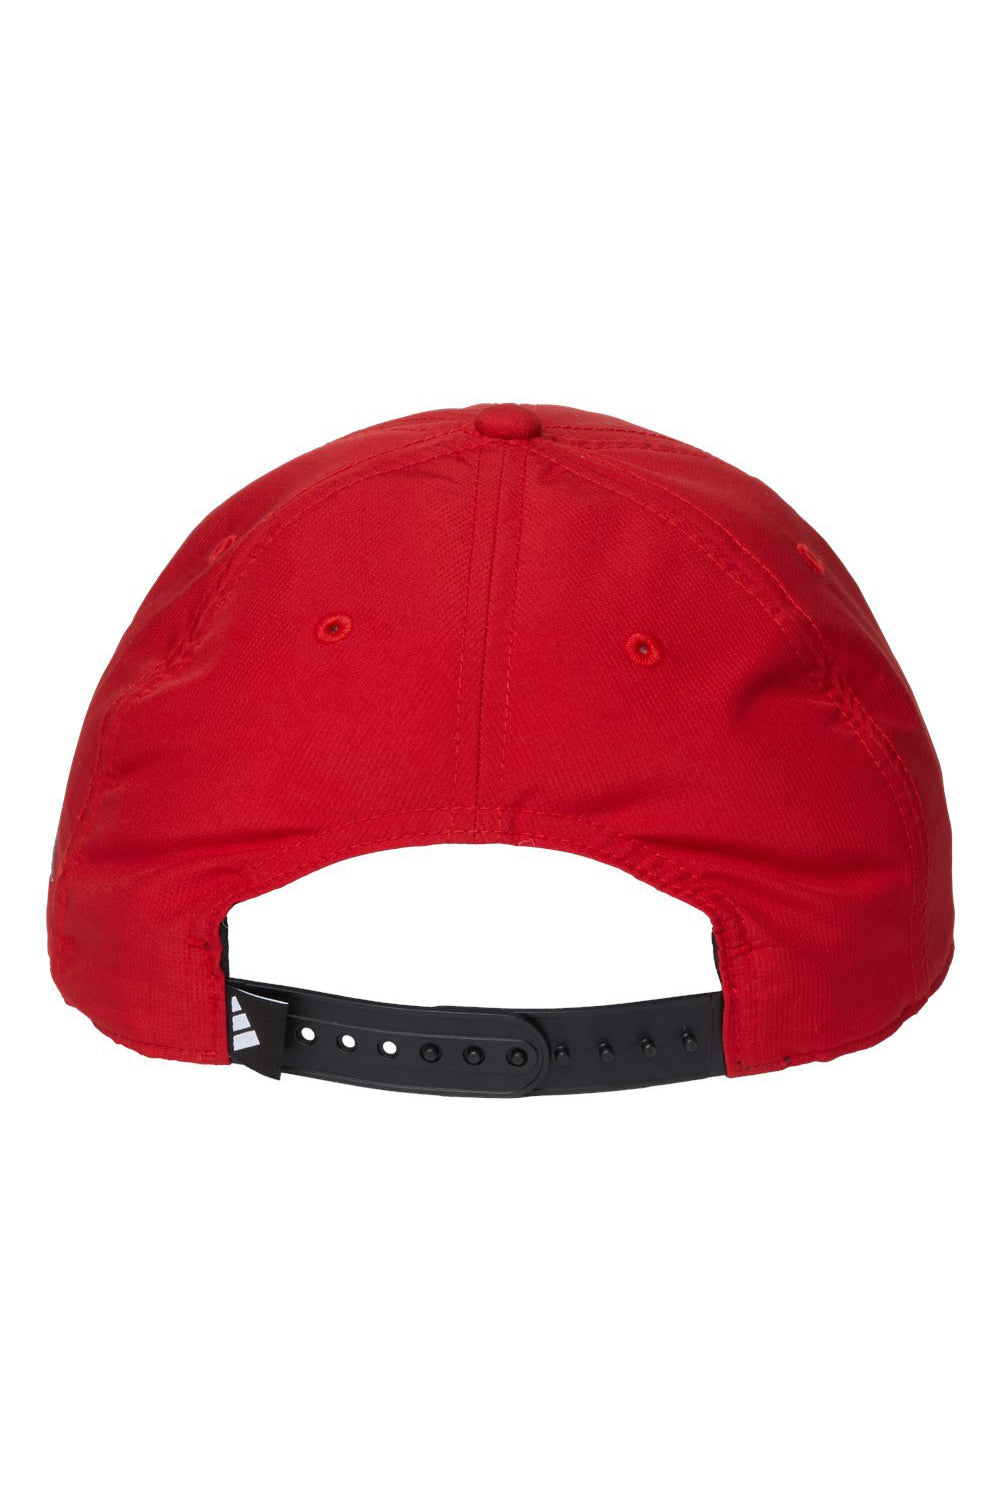 Adidas A600S Mens Sustainable Performance Max Moisture Wicking Snapback Hat Power Red Flat Back